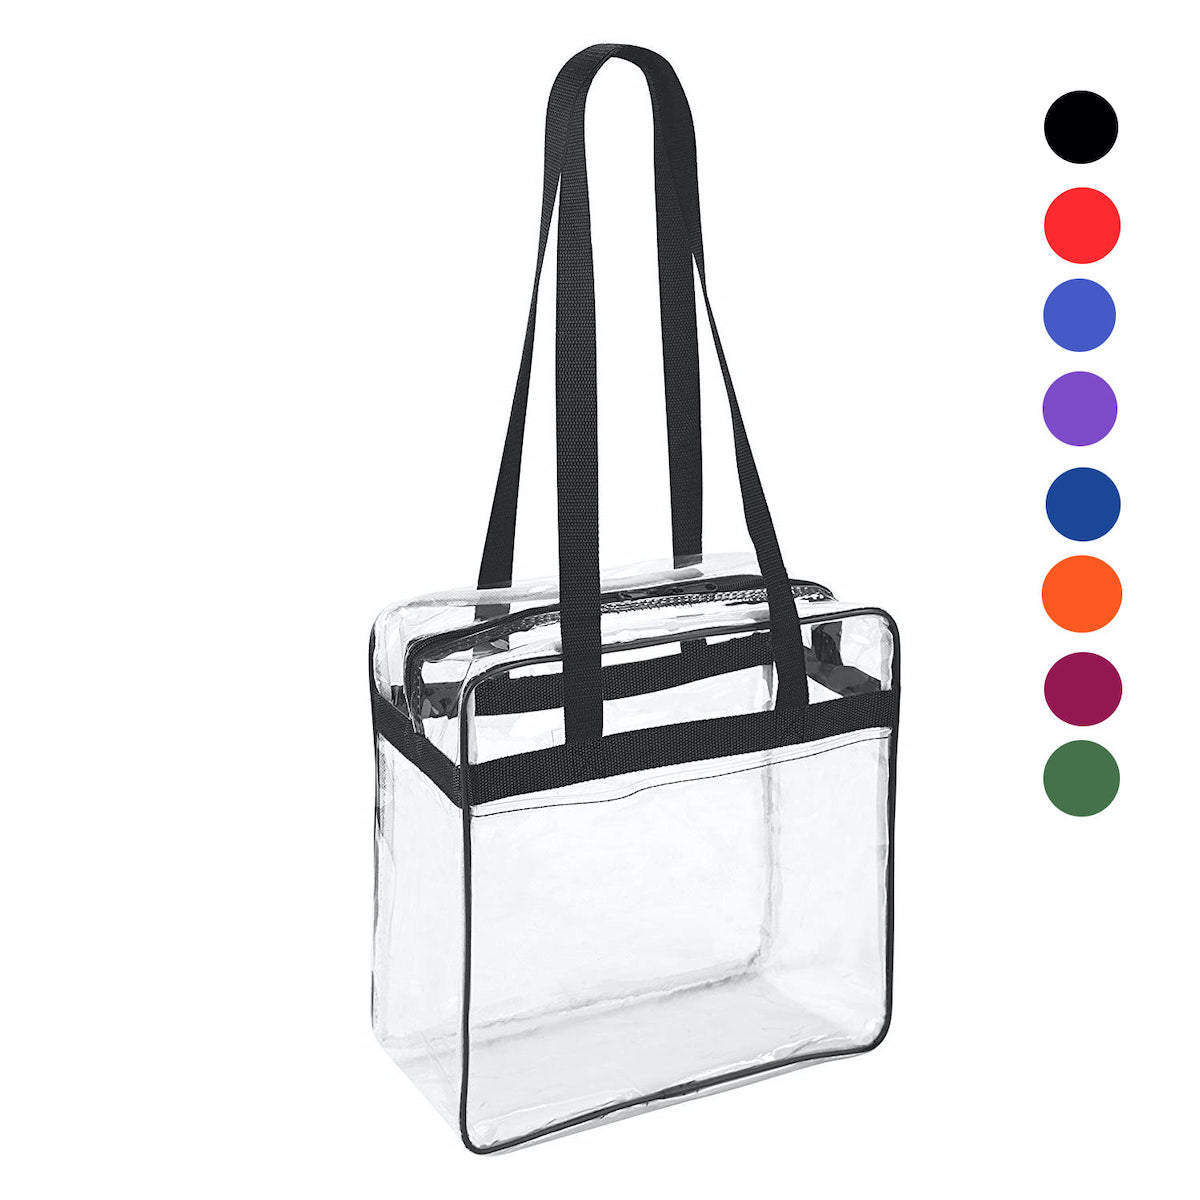 Clear PVC Tote Bag, Stadium Approved Tote with Zipper (19 x 6 x 13